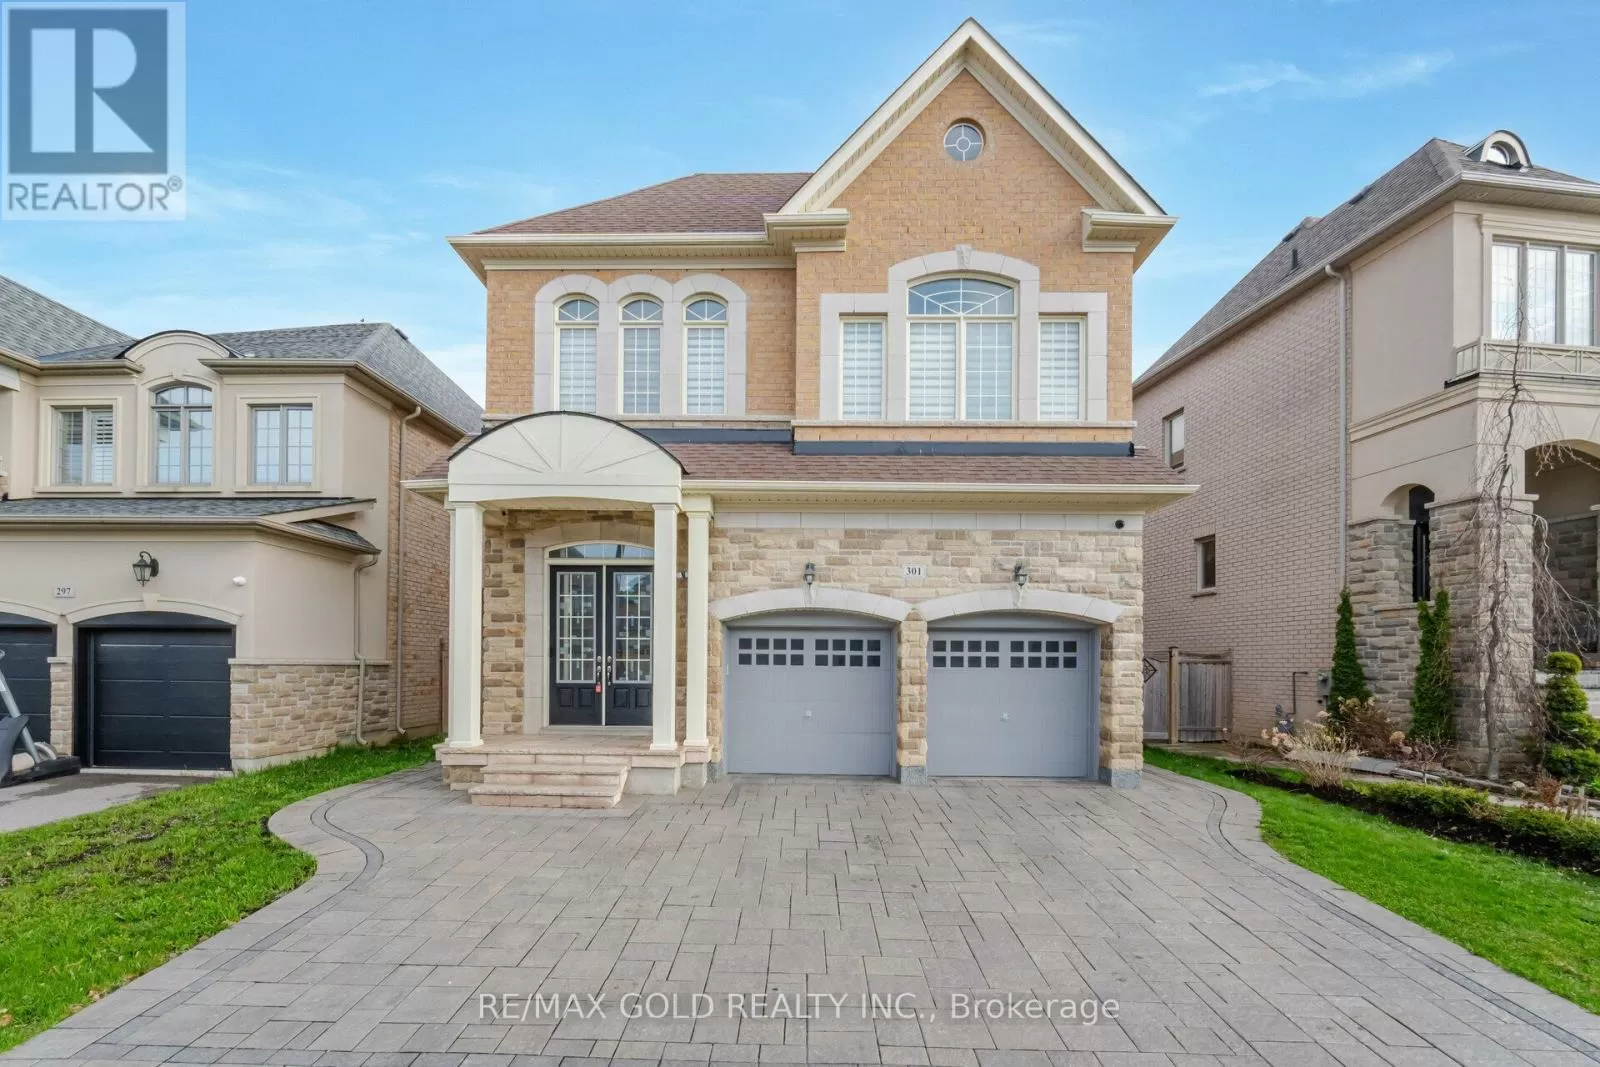 House for rent: 301 Chatfield Drive, Vaughan, Ontario L4H 3R7